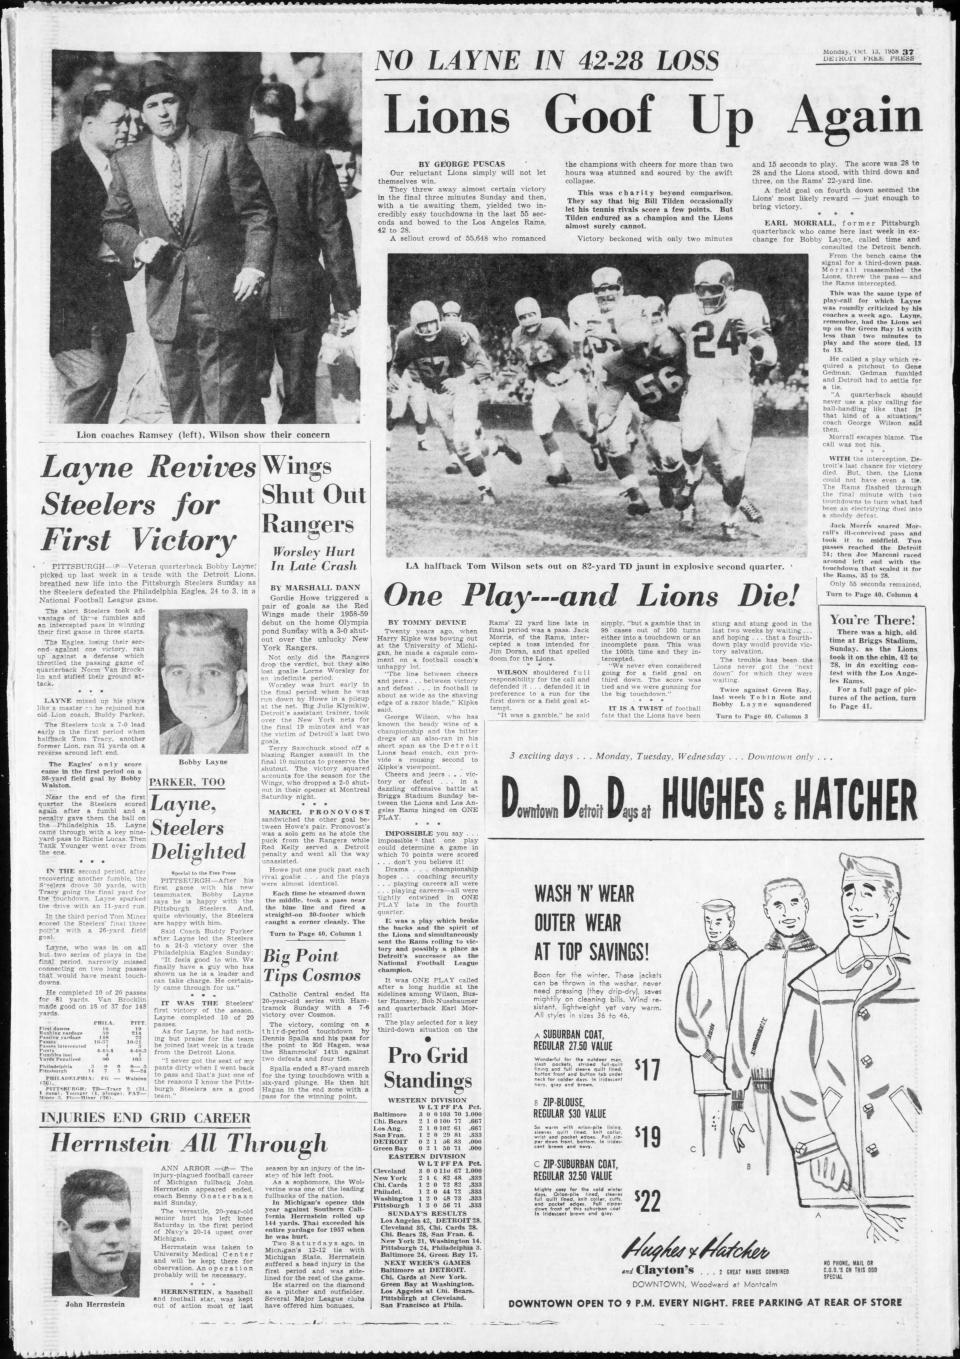 The Detroit Free Press sports page Monday, Oct. 13, 1958, covering Detroit Lions first game (an epic 42-28 home collapse vs. Los Angeles Rams) after trading Bobby Layne trade to Pittsburgh Steelers. Headline: "Lions Goof Up Again." The Steelers won Layne's debut, 24-3.